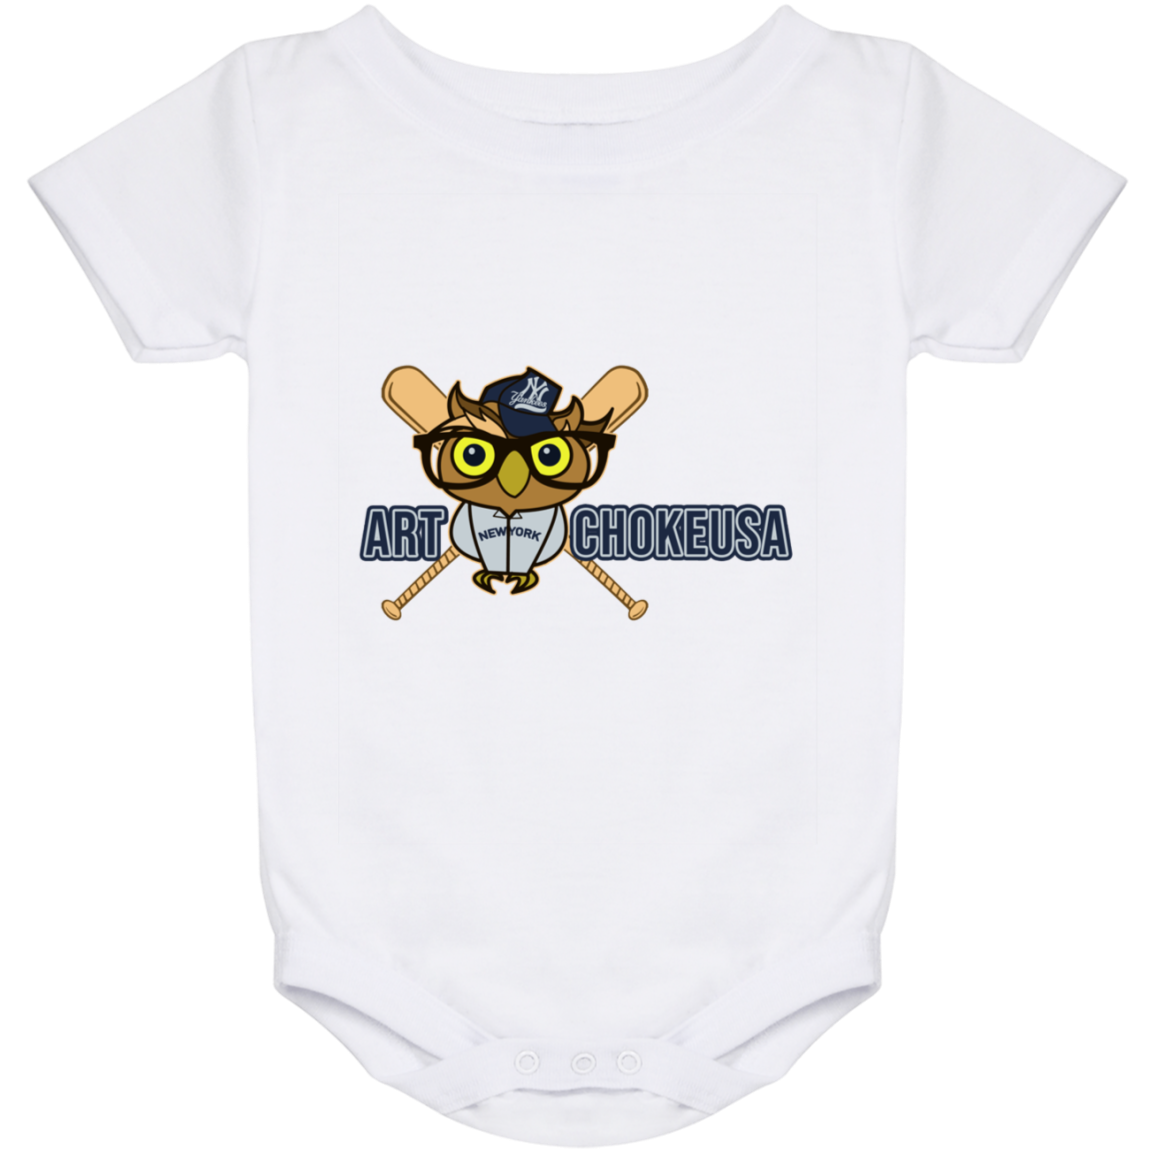 ArtichokeUSA Character and Font design. New York Owl. NY Yankees Fan Art. Let's Create Your Own Team Design Today. Baby Onesie 24 Month